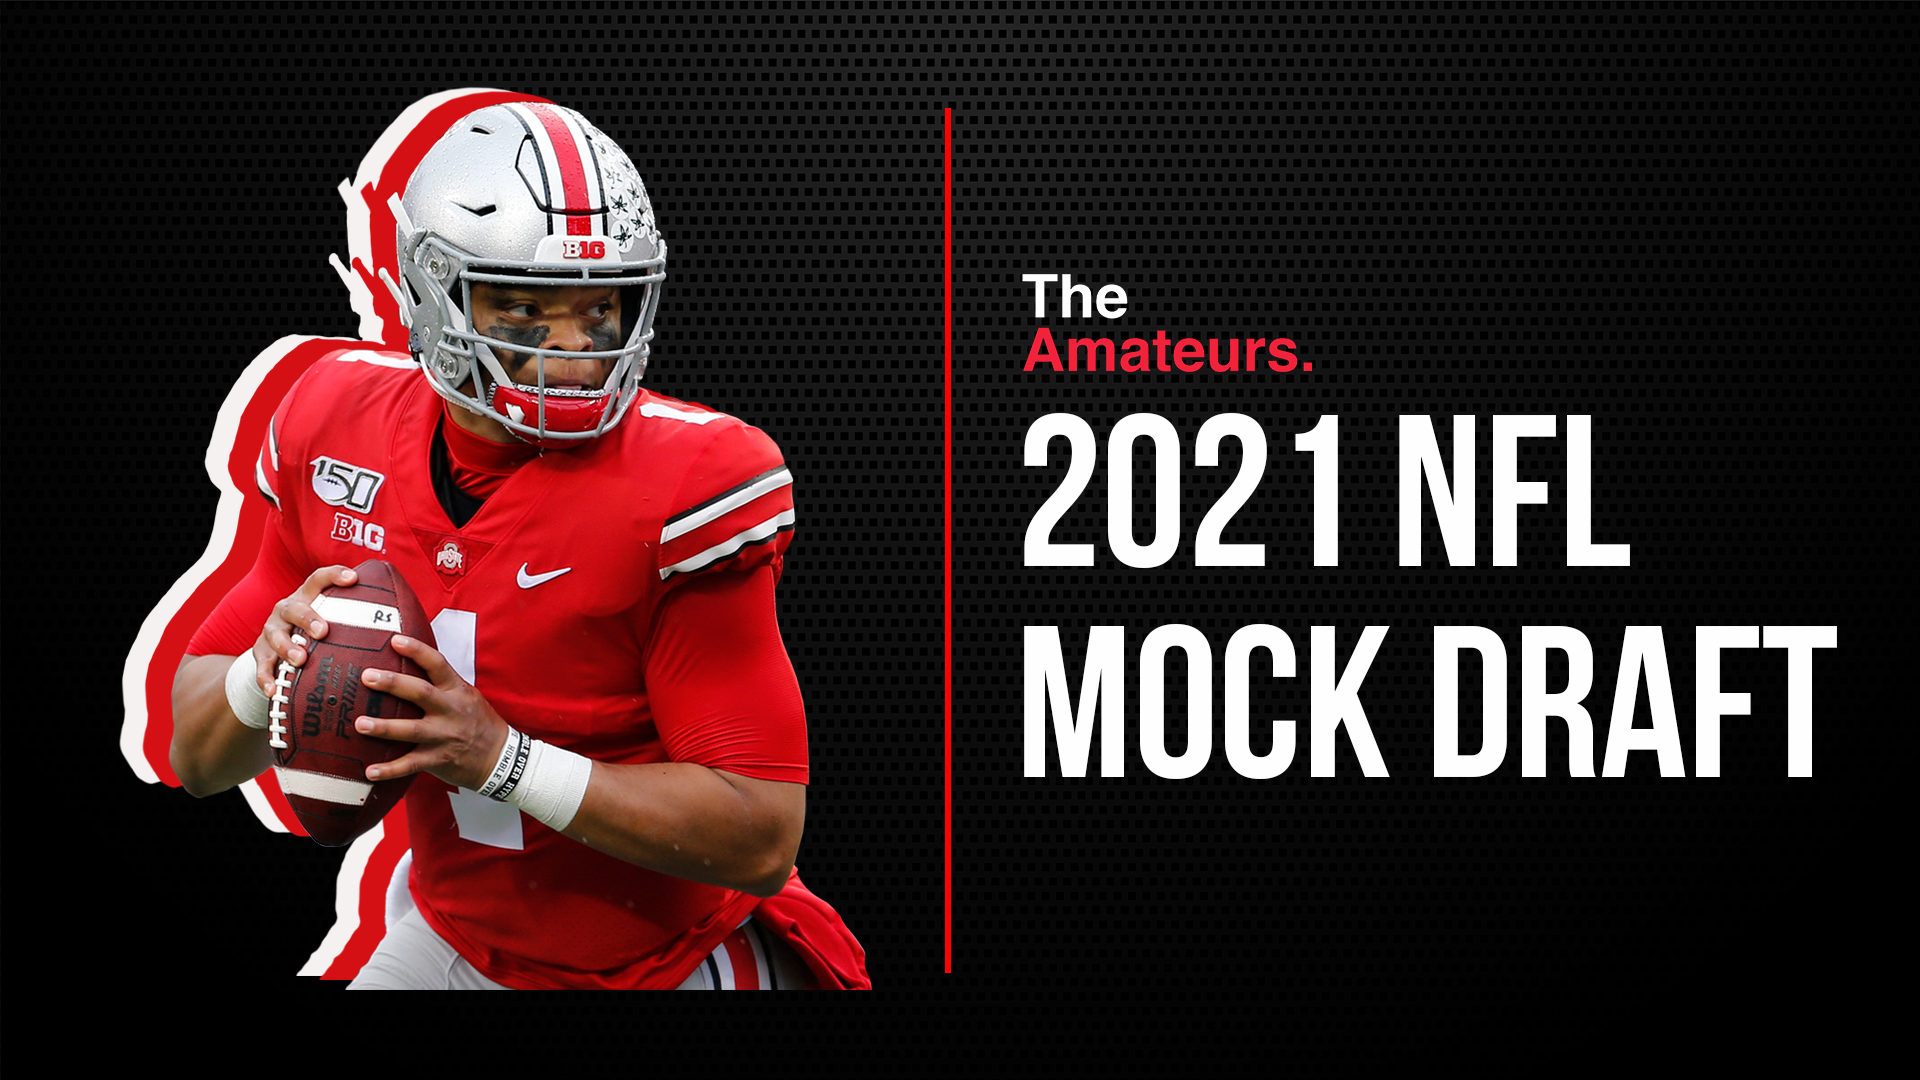 NFL mock draft 2020: Welcome to the offseason with 2 rounds of picks 